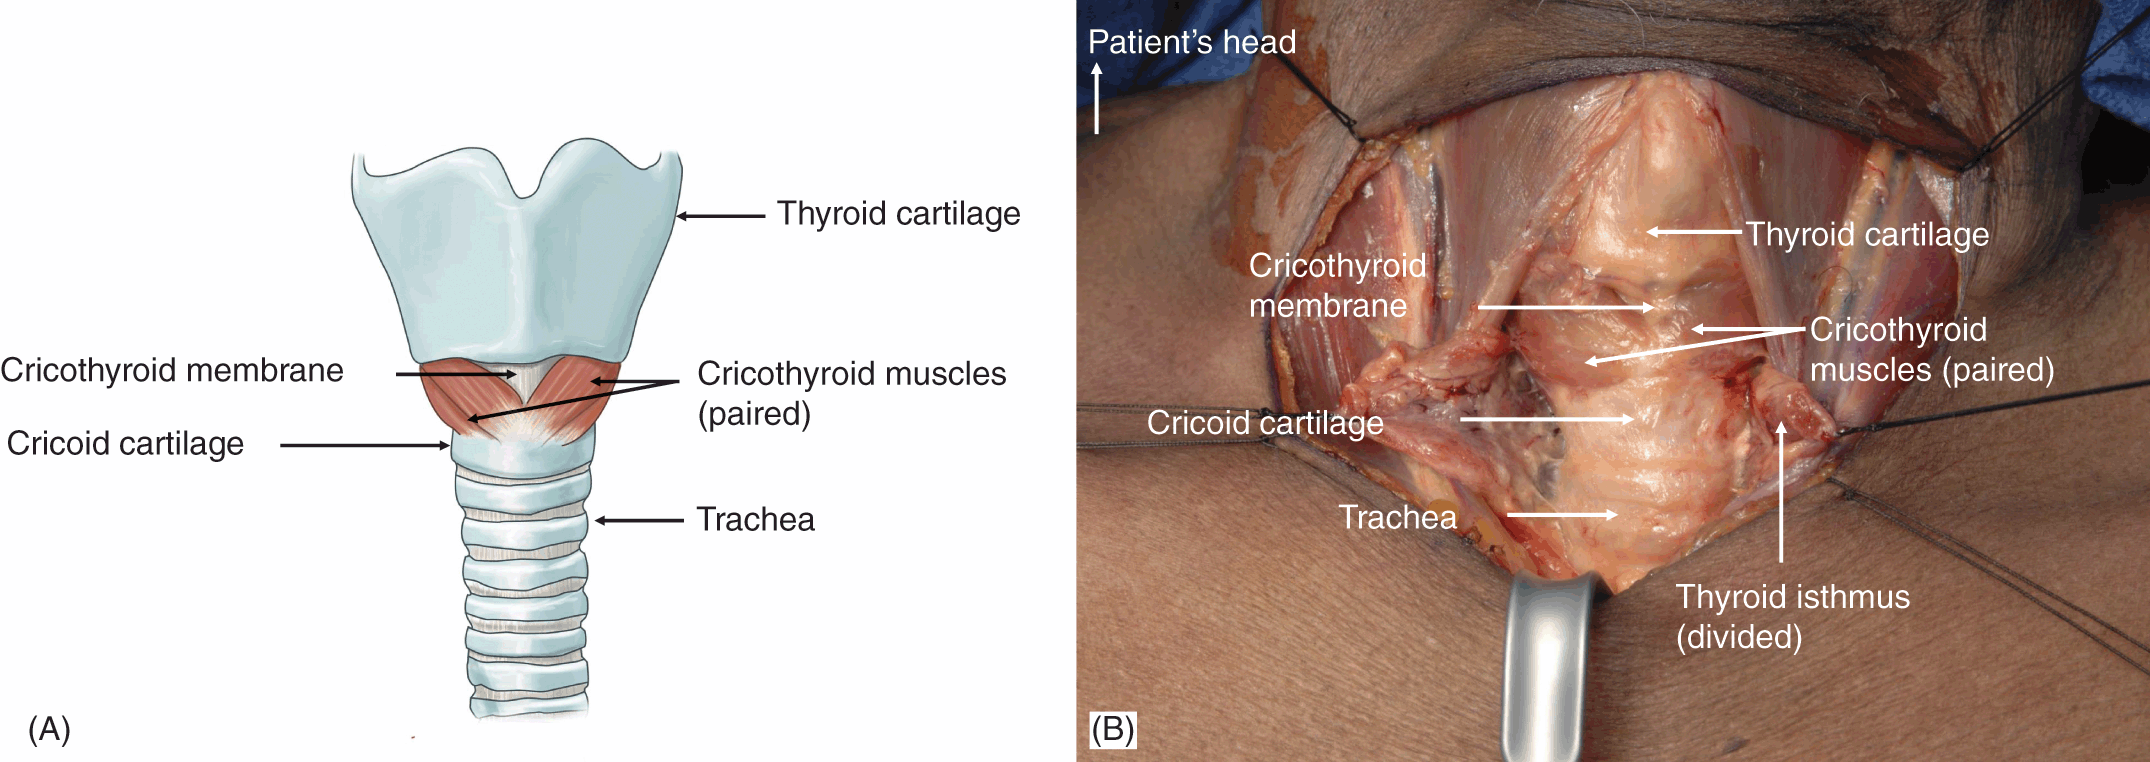 cricothyroid membrane incision